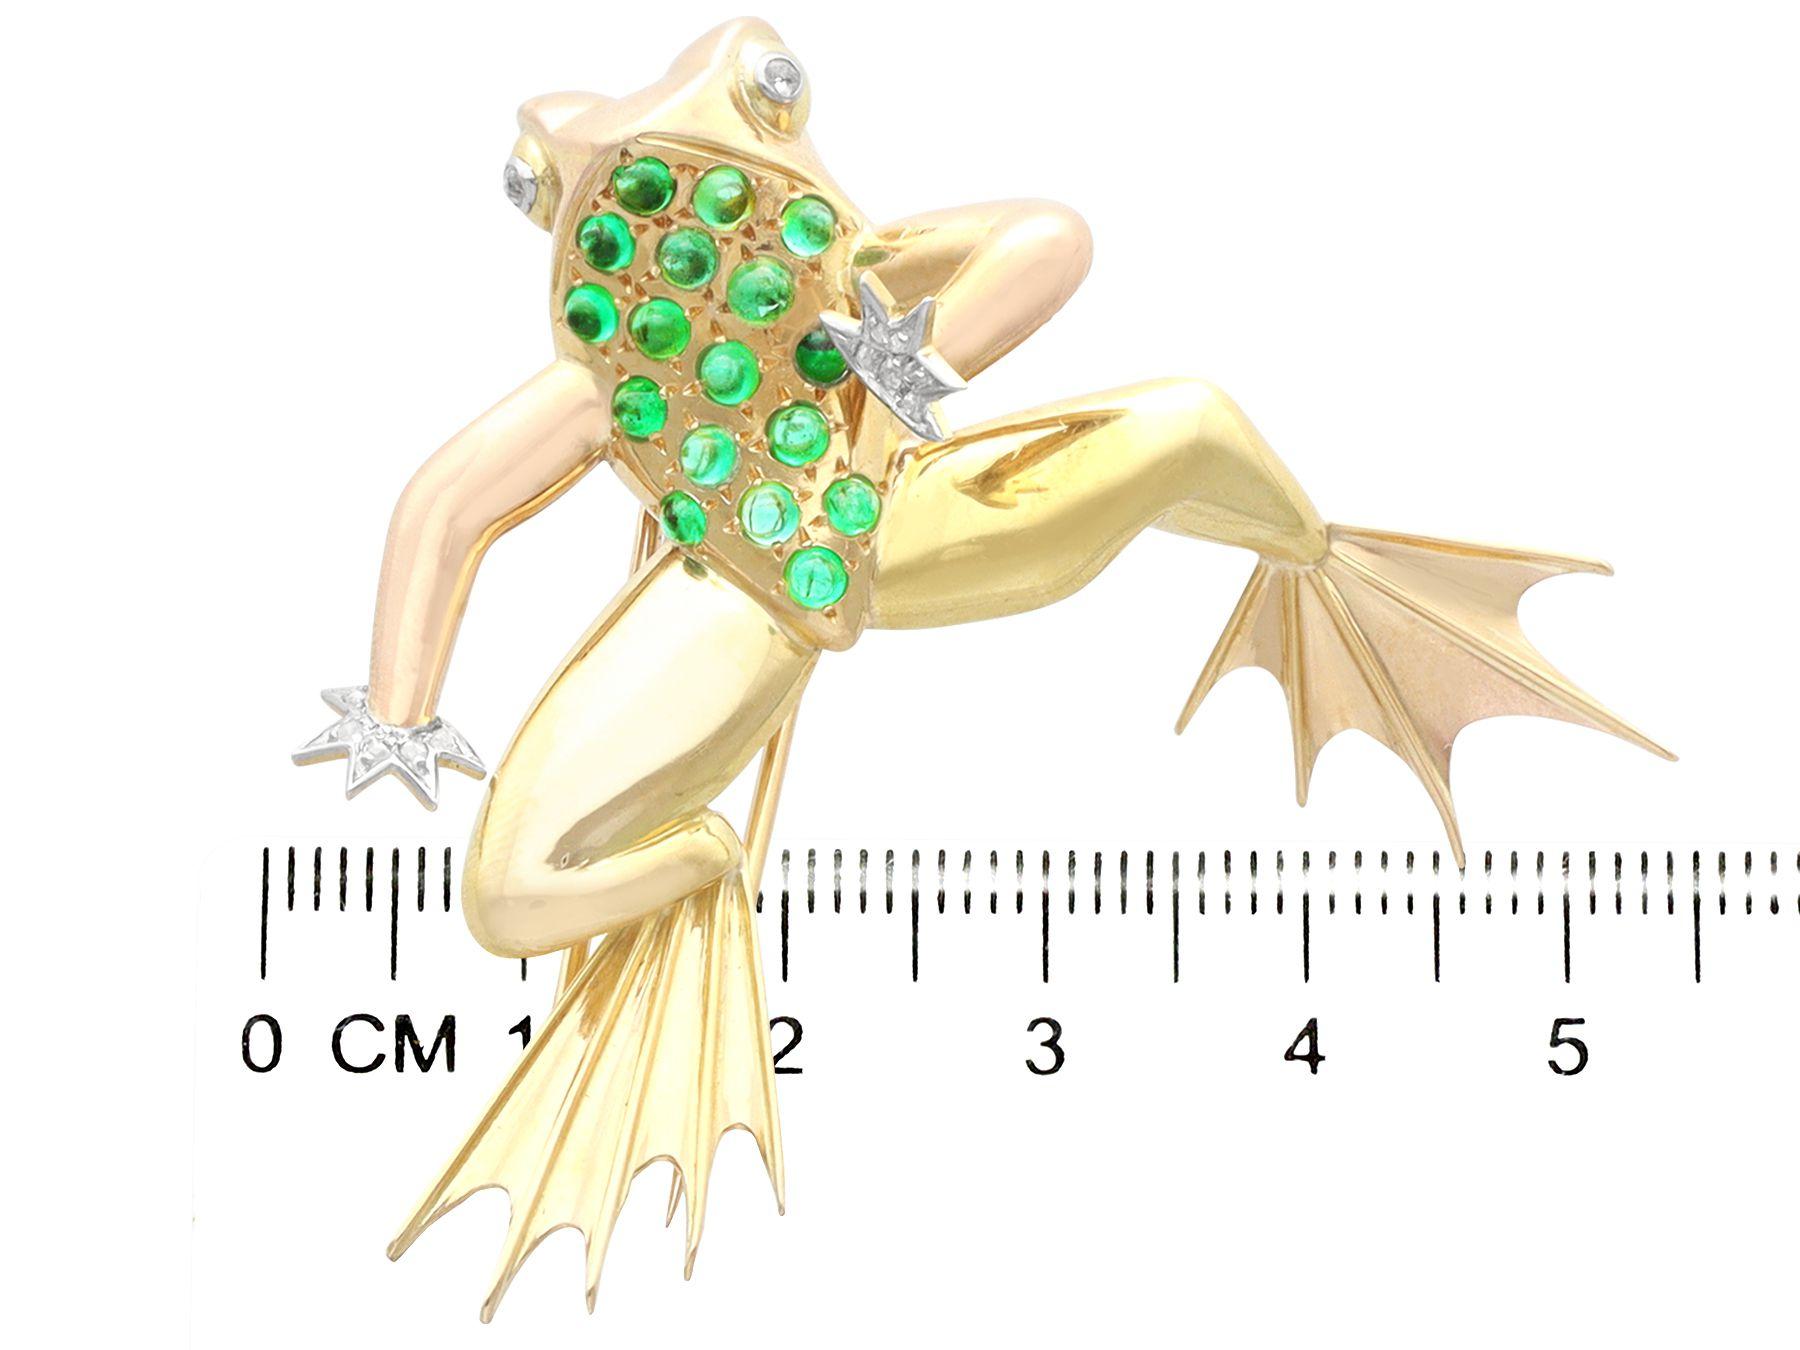 Vintage French 0.75 Carat Emerald and 0.11 Carat Diamond Yellow Gold Frog Brooch For Sale 2